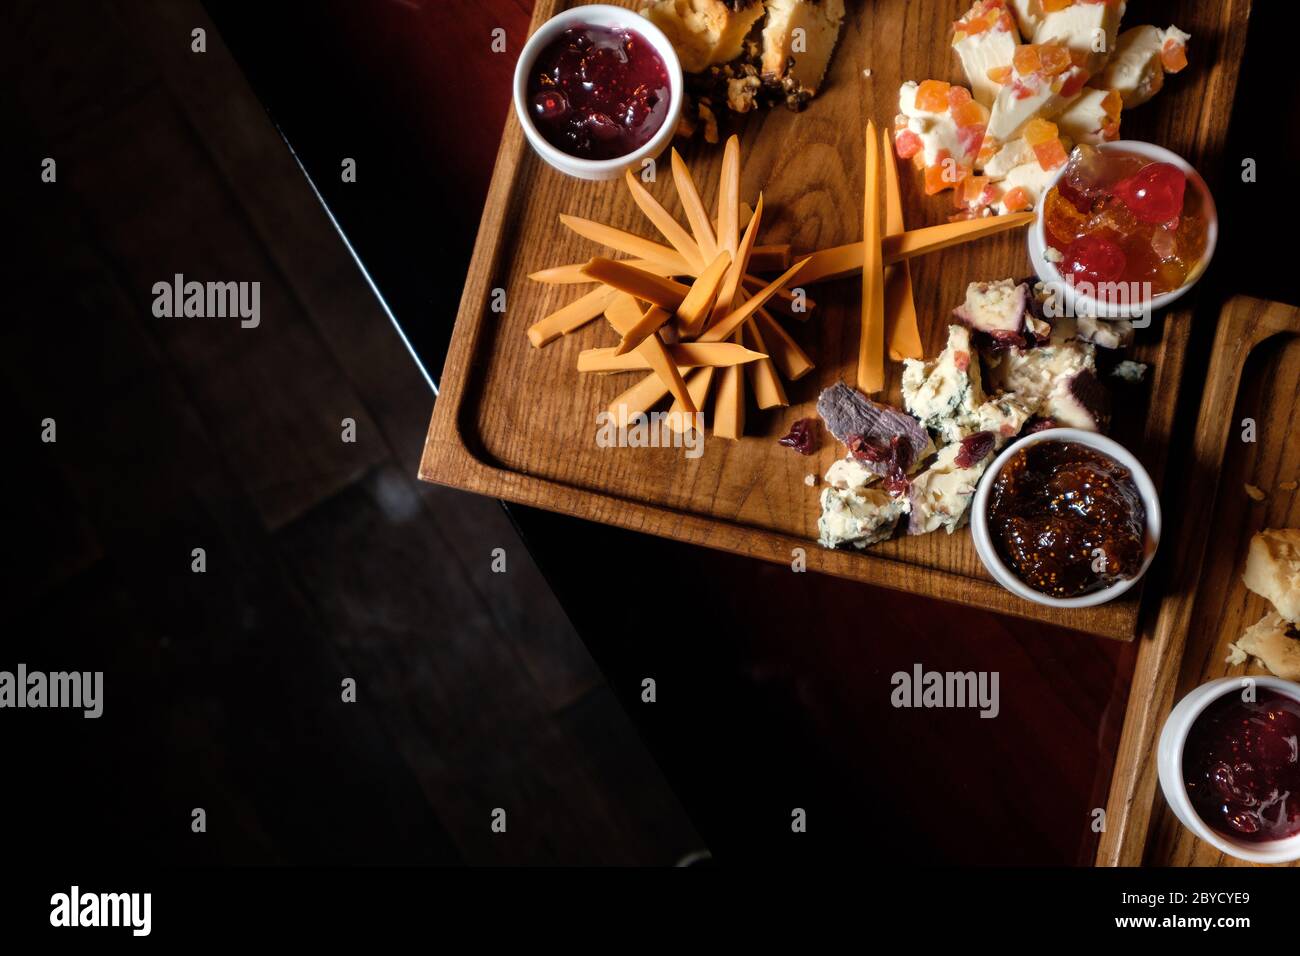 a top view of a wooden plate with various cheeses and jam, cut into small pieces on the table background, Flat lay Stock Photo